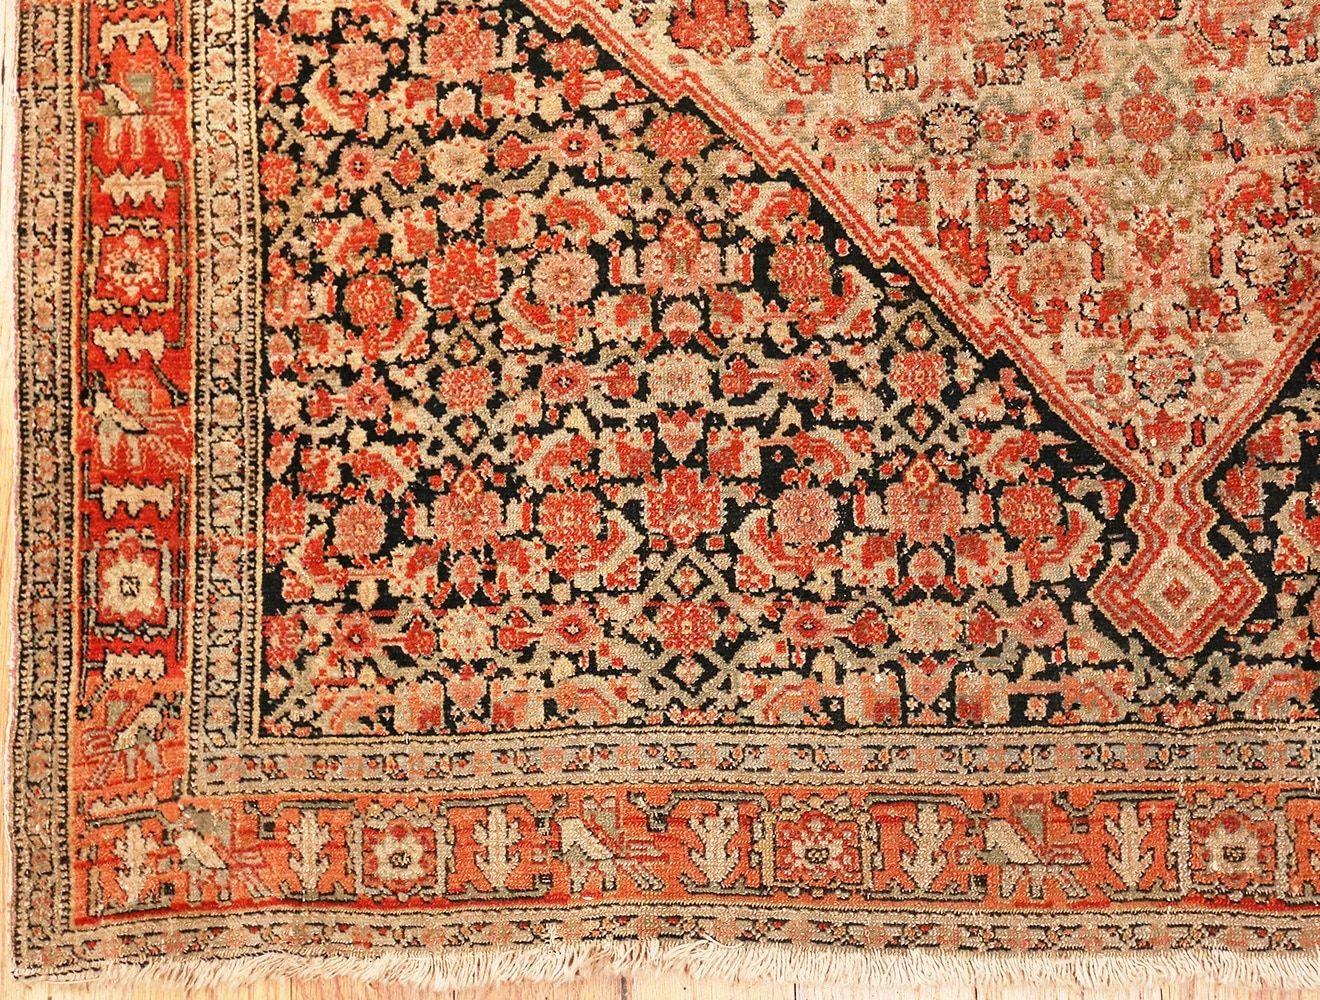 20th Century Antique Persian Senneh Runner. Size: 3 ft 10 in x 19 ft 2 in (1.17 m x 5.84 m)